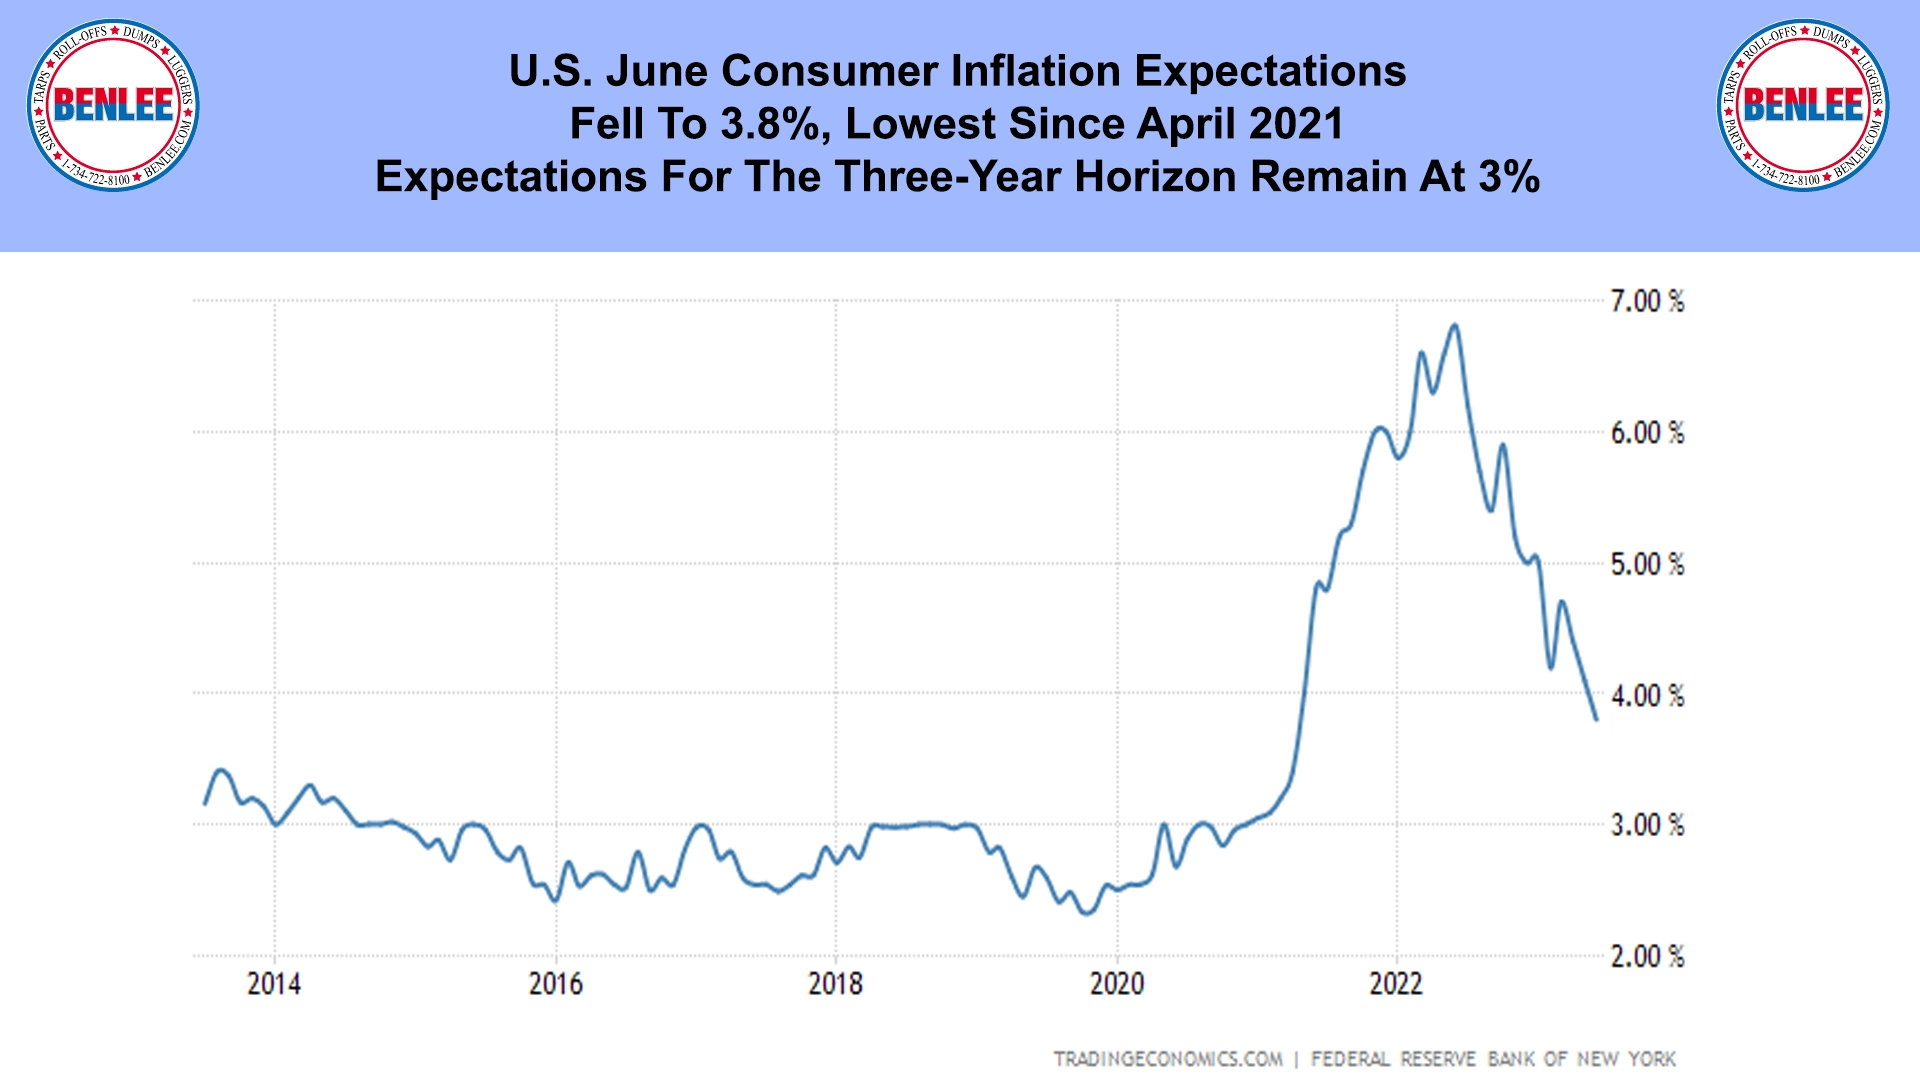 U.S. June Consumer Inflation Expectations